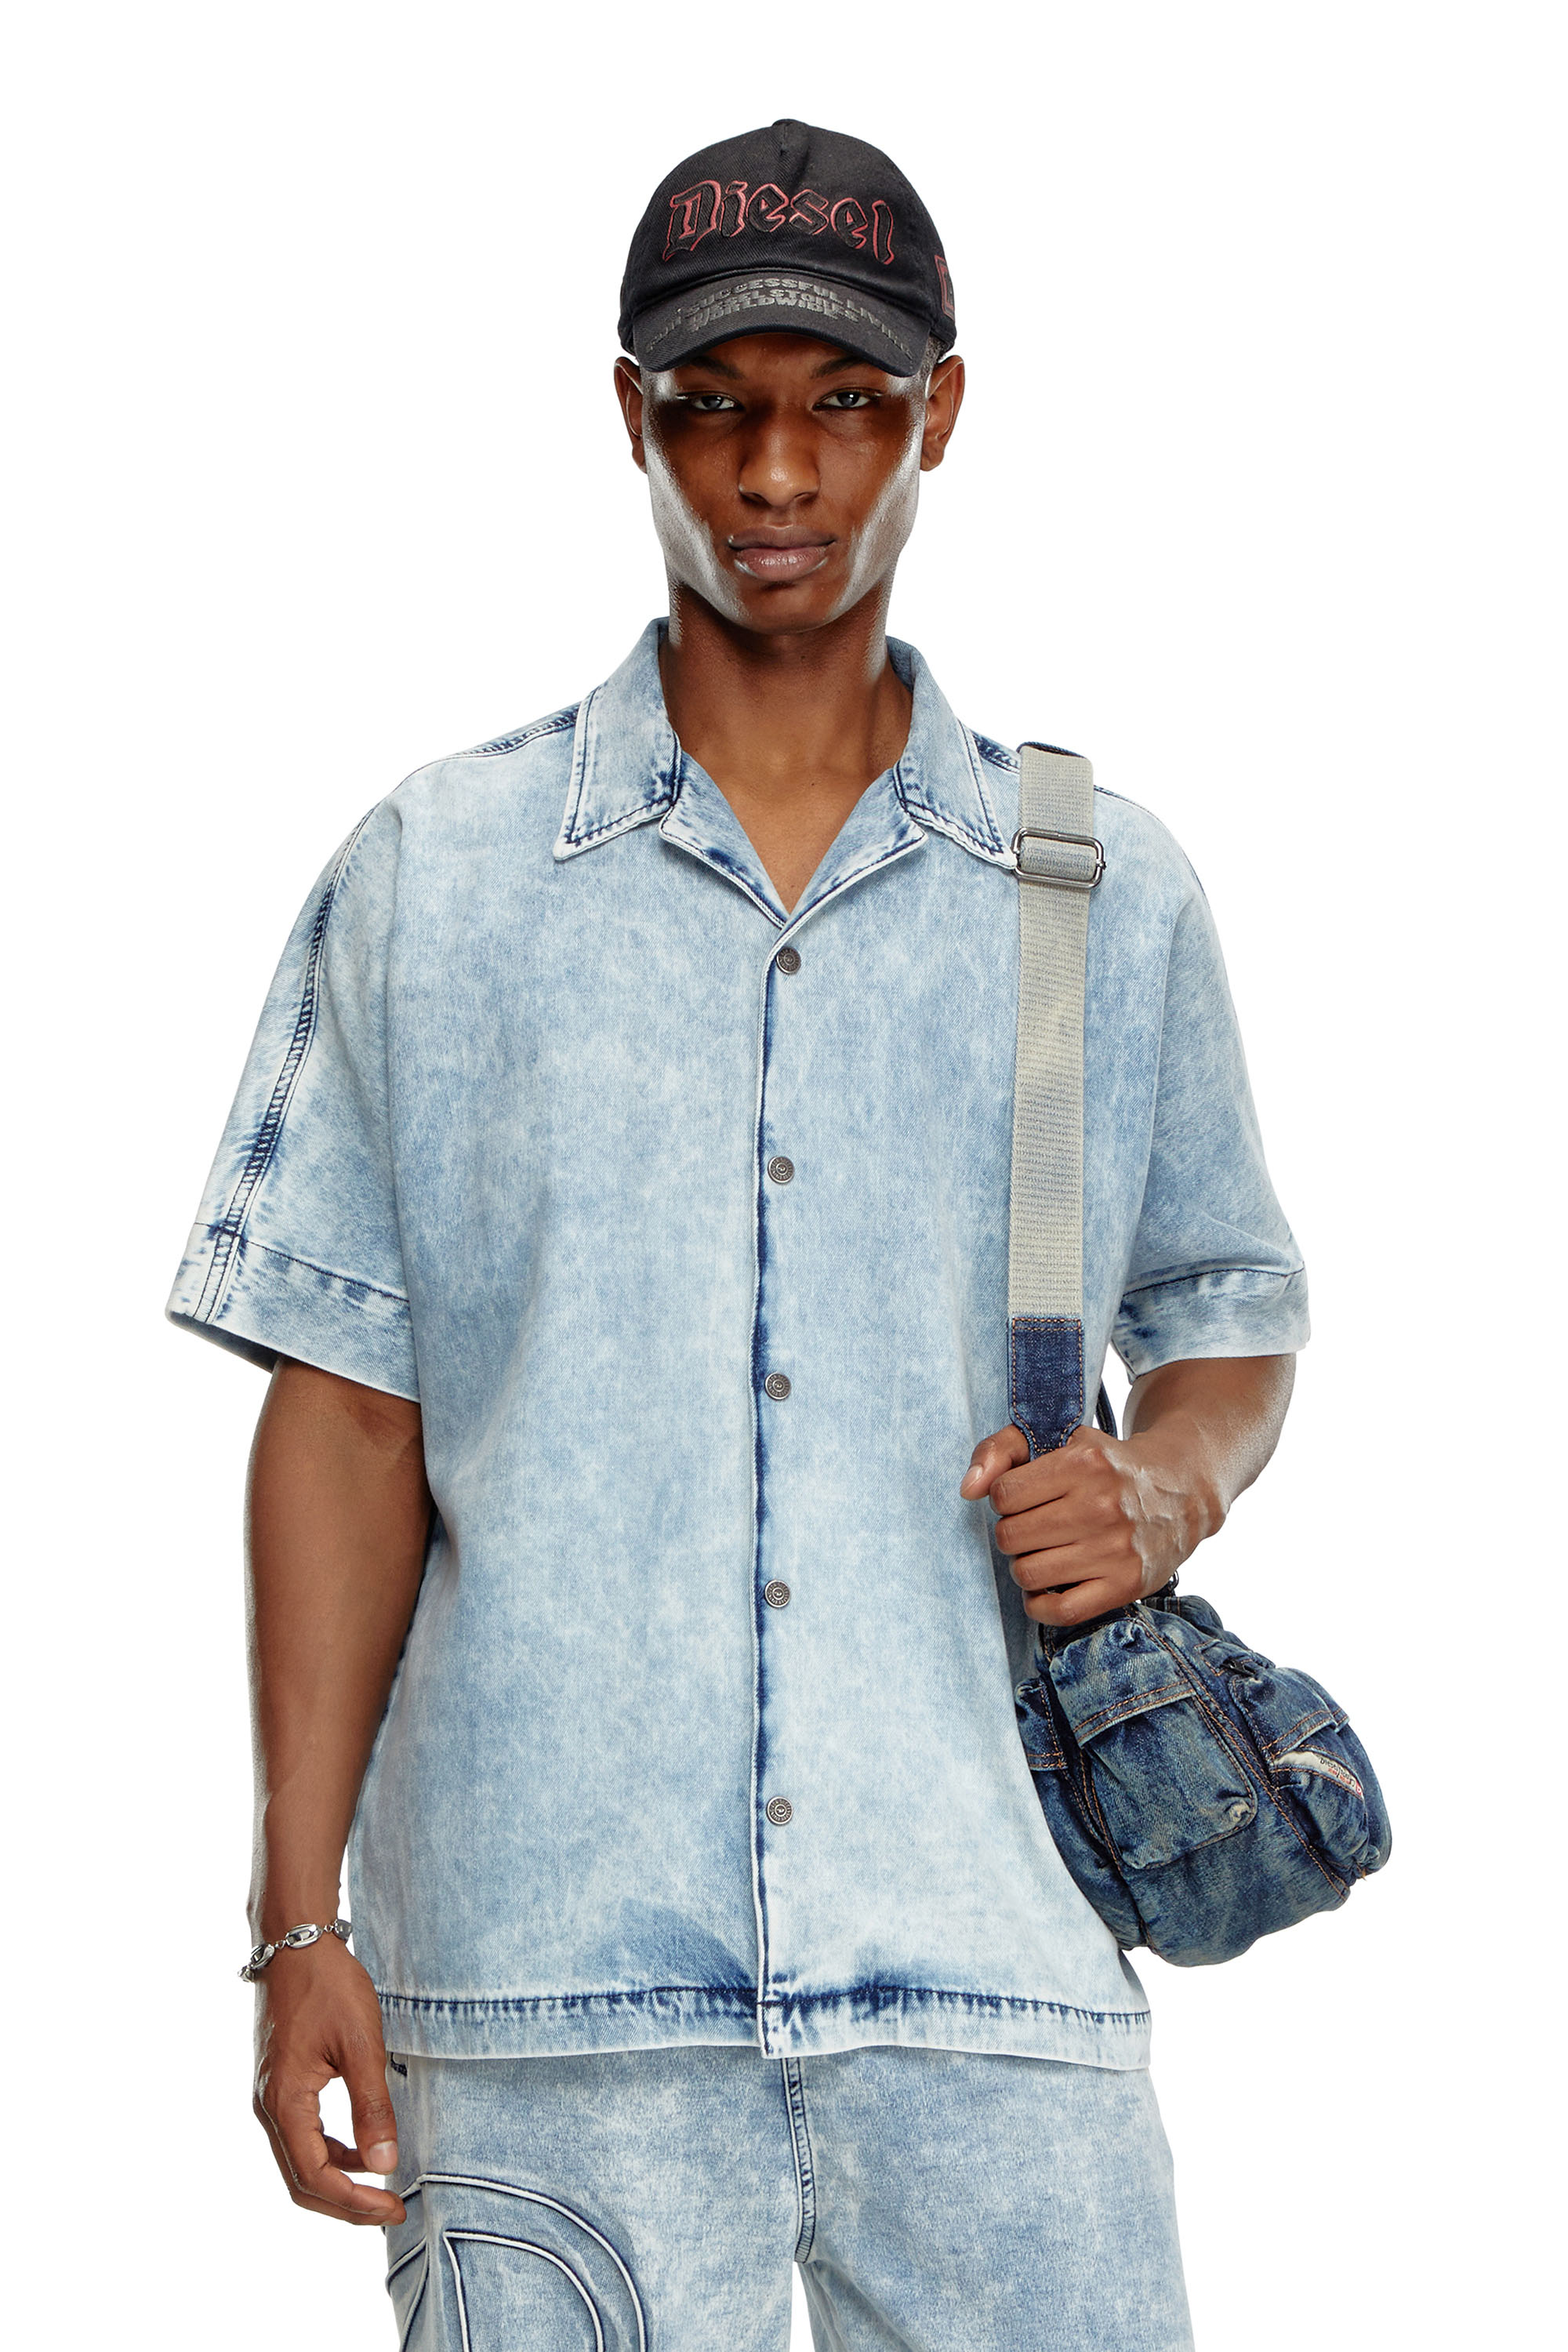 Diesel - D-NABIL-S, Male Denim bowling shirt with Oval D in ブルー - Image 4